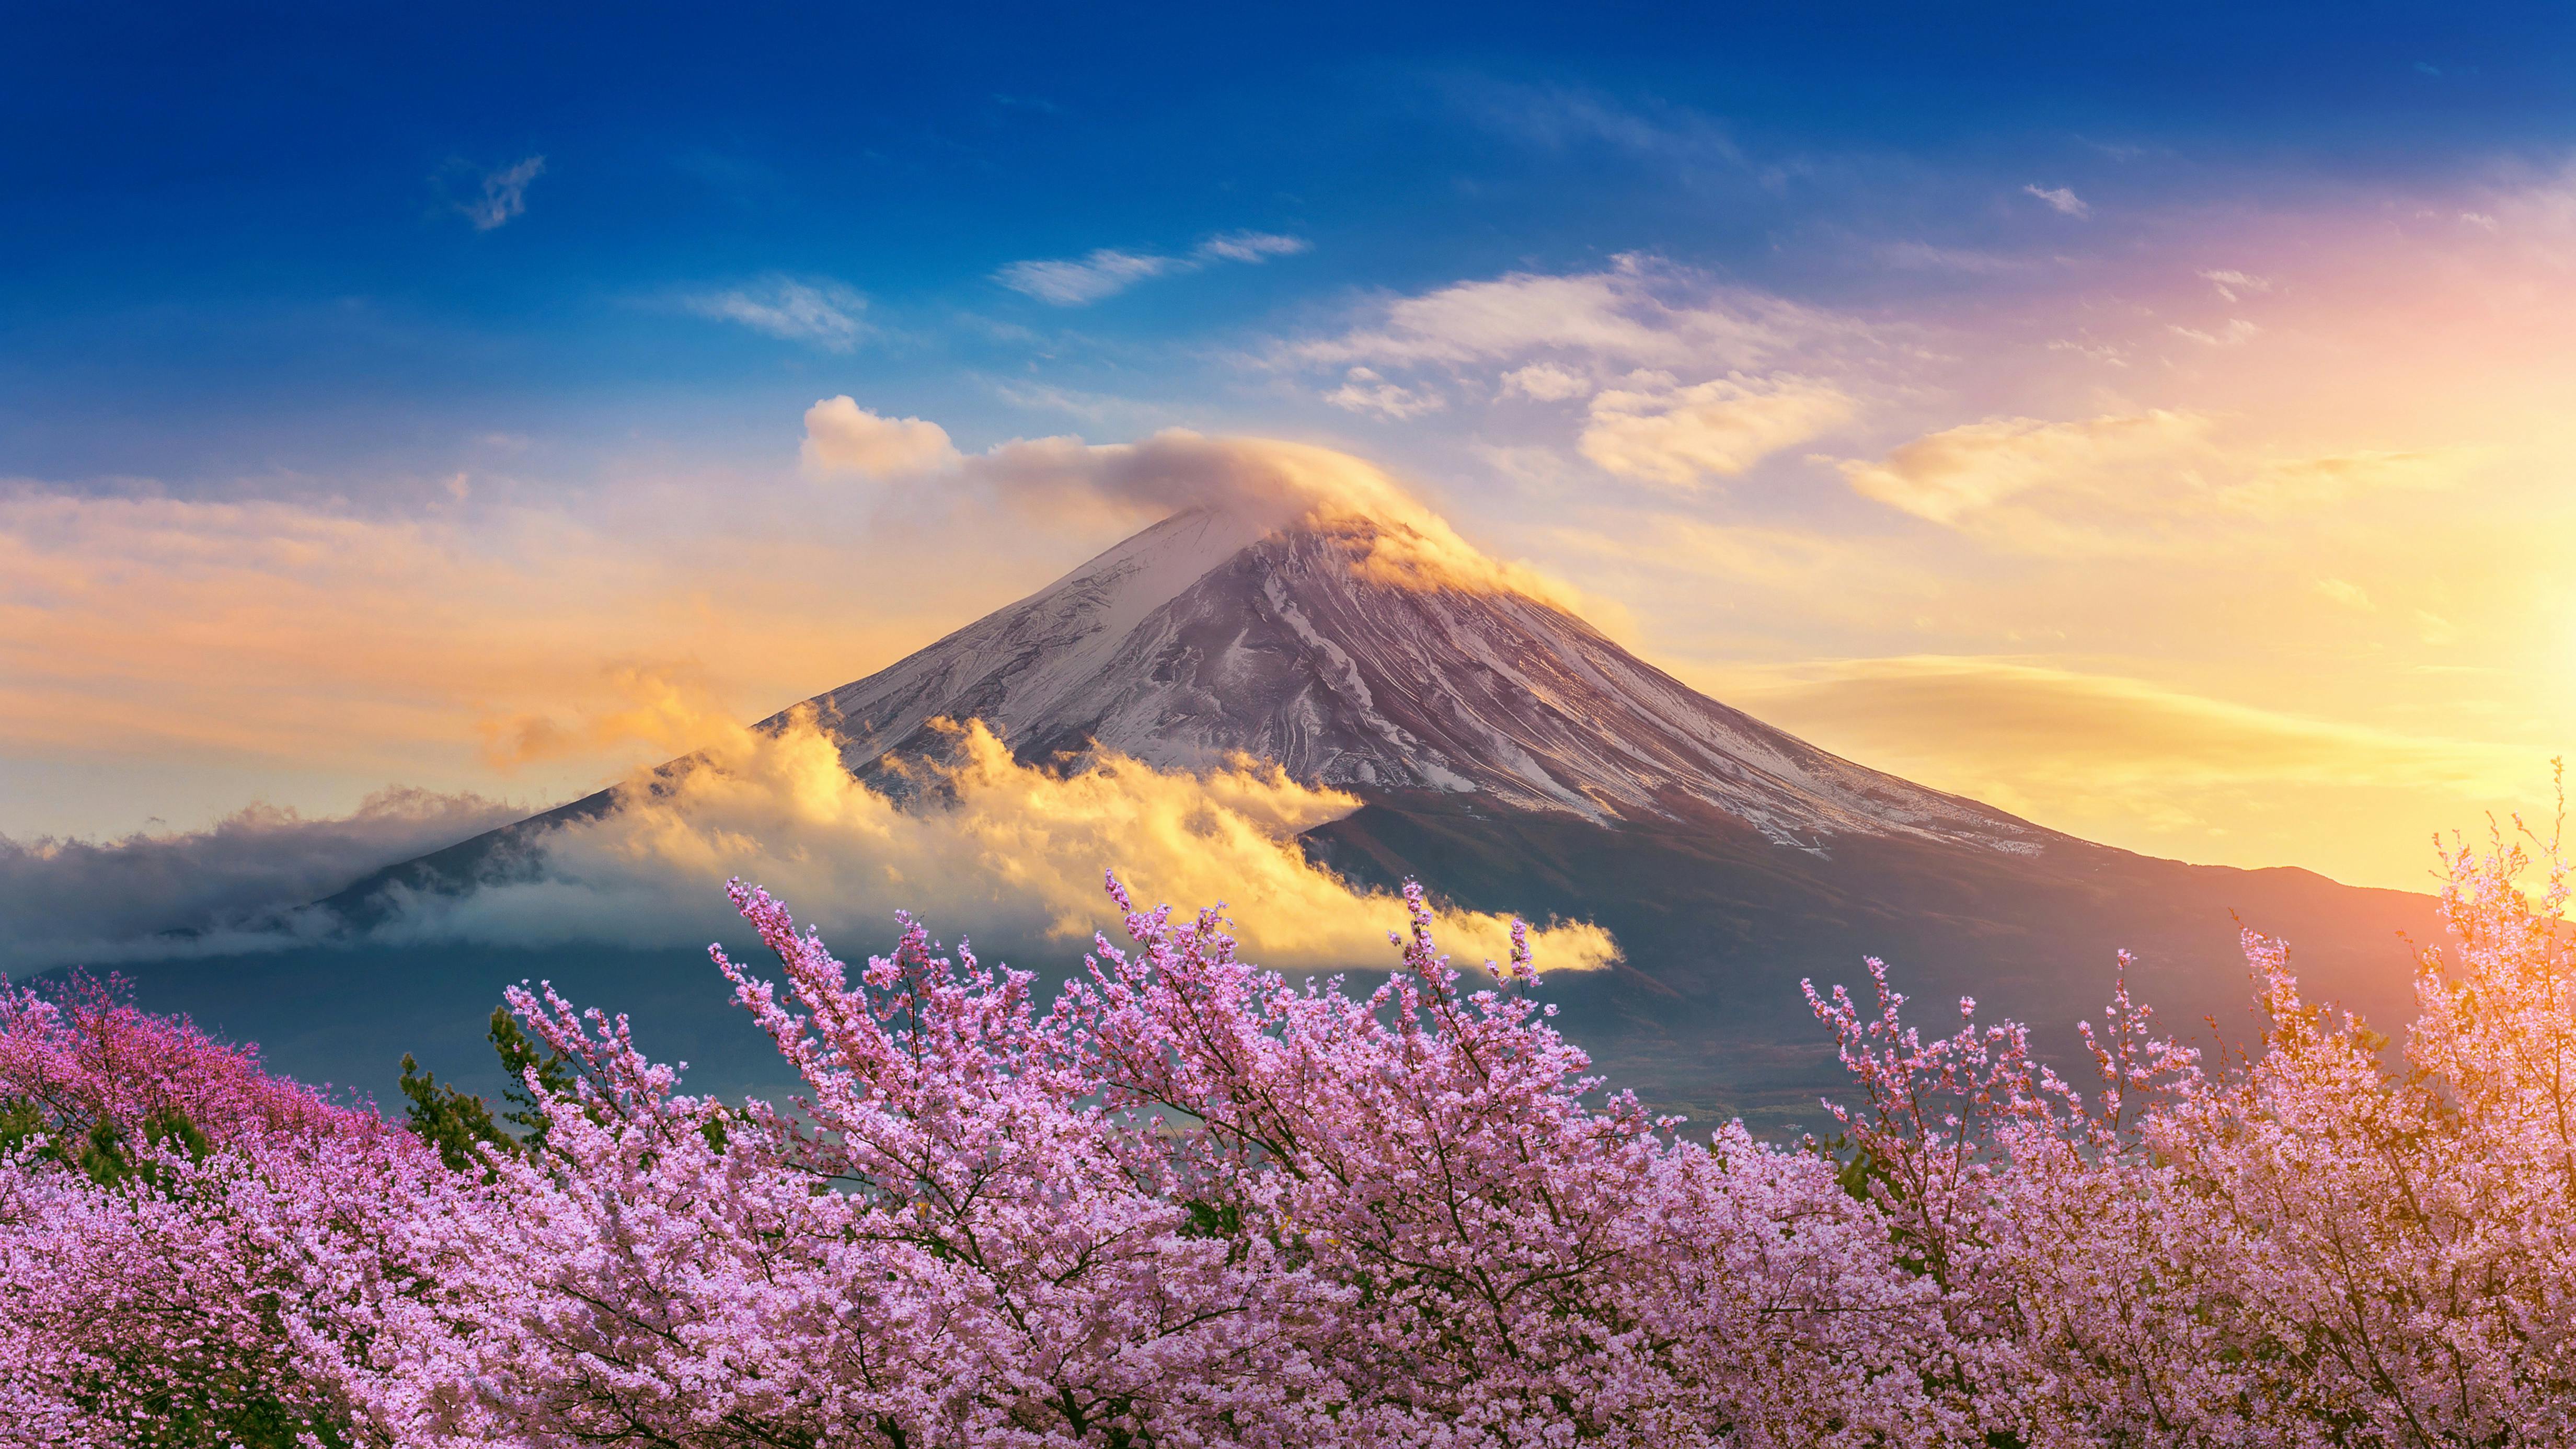 Fuji mountain and cherry blossoms in spring, Japan.